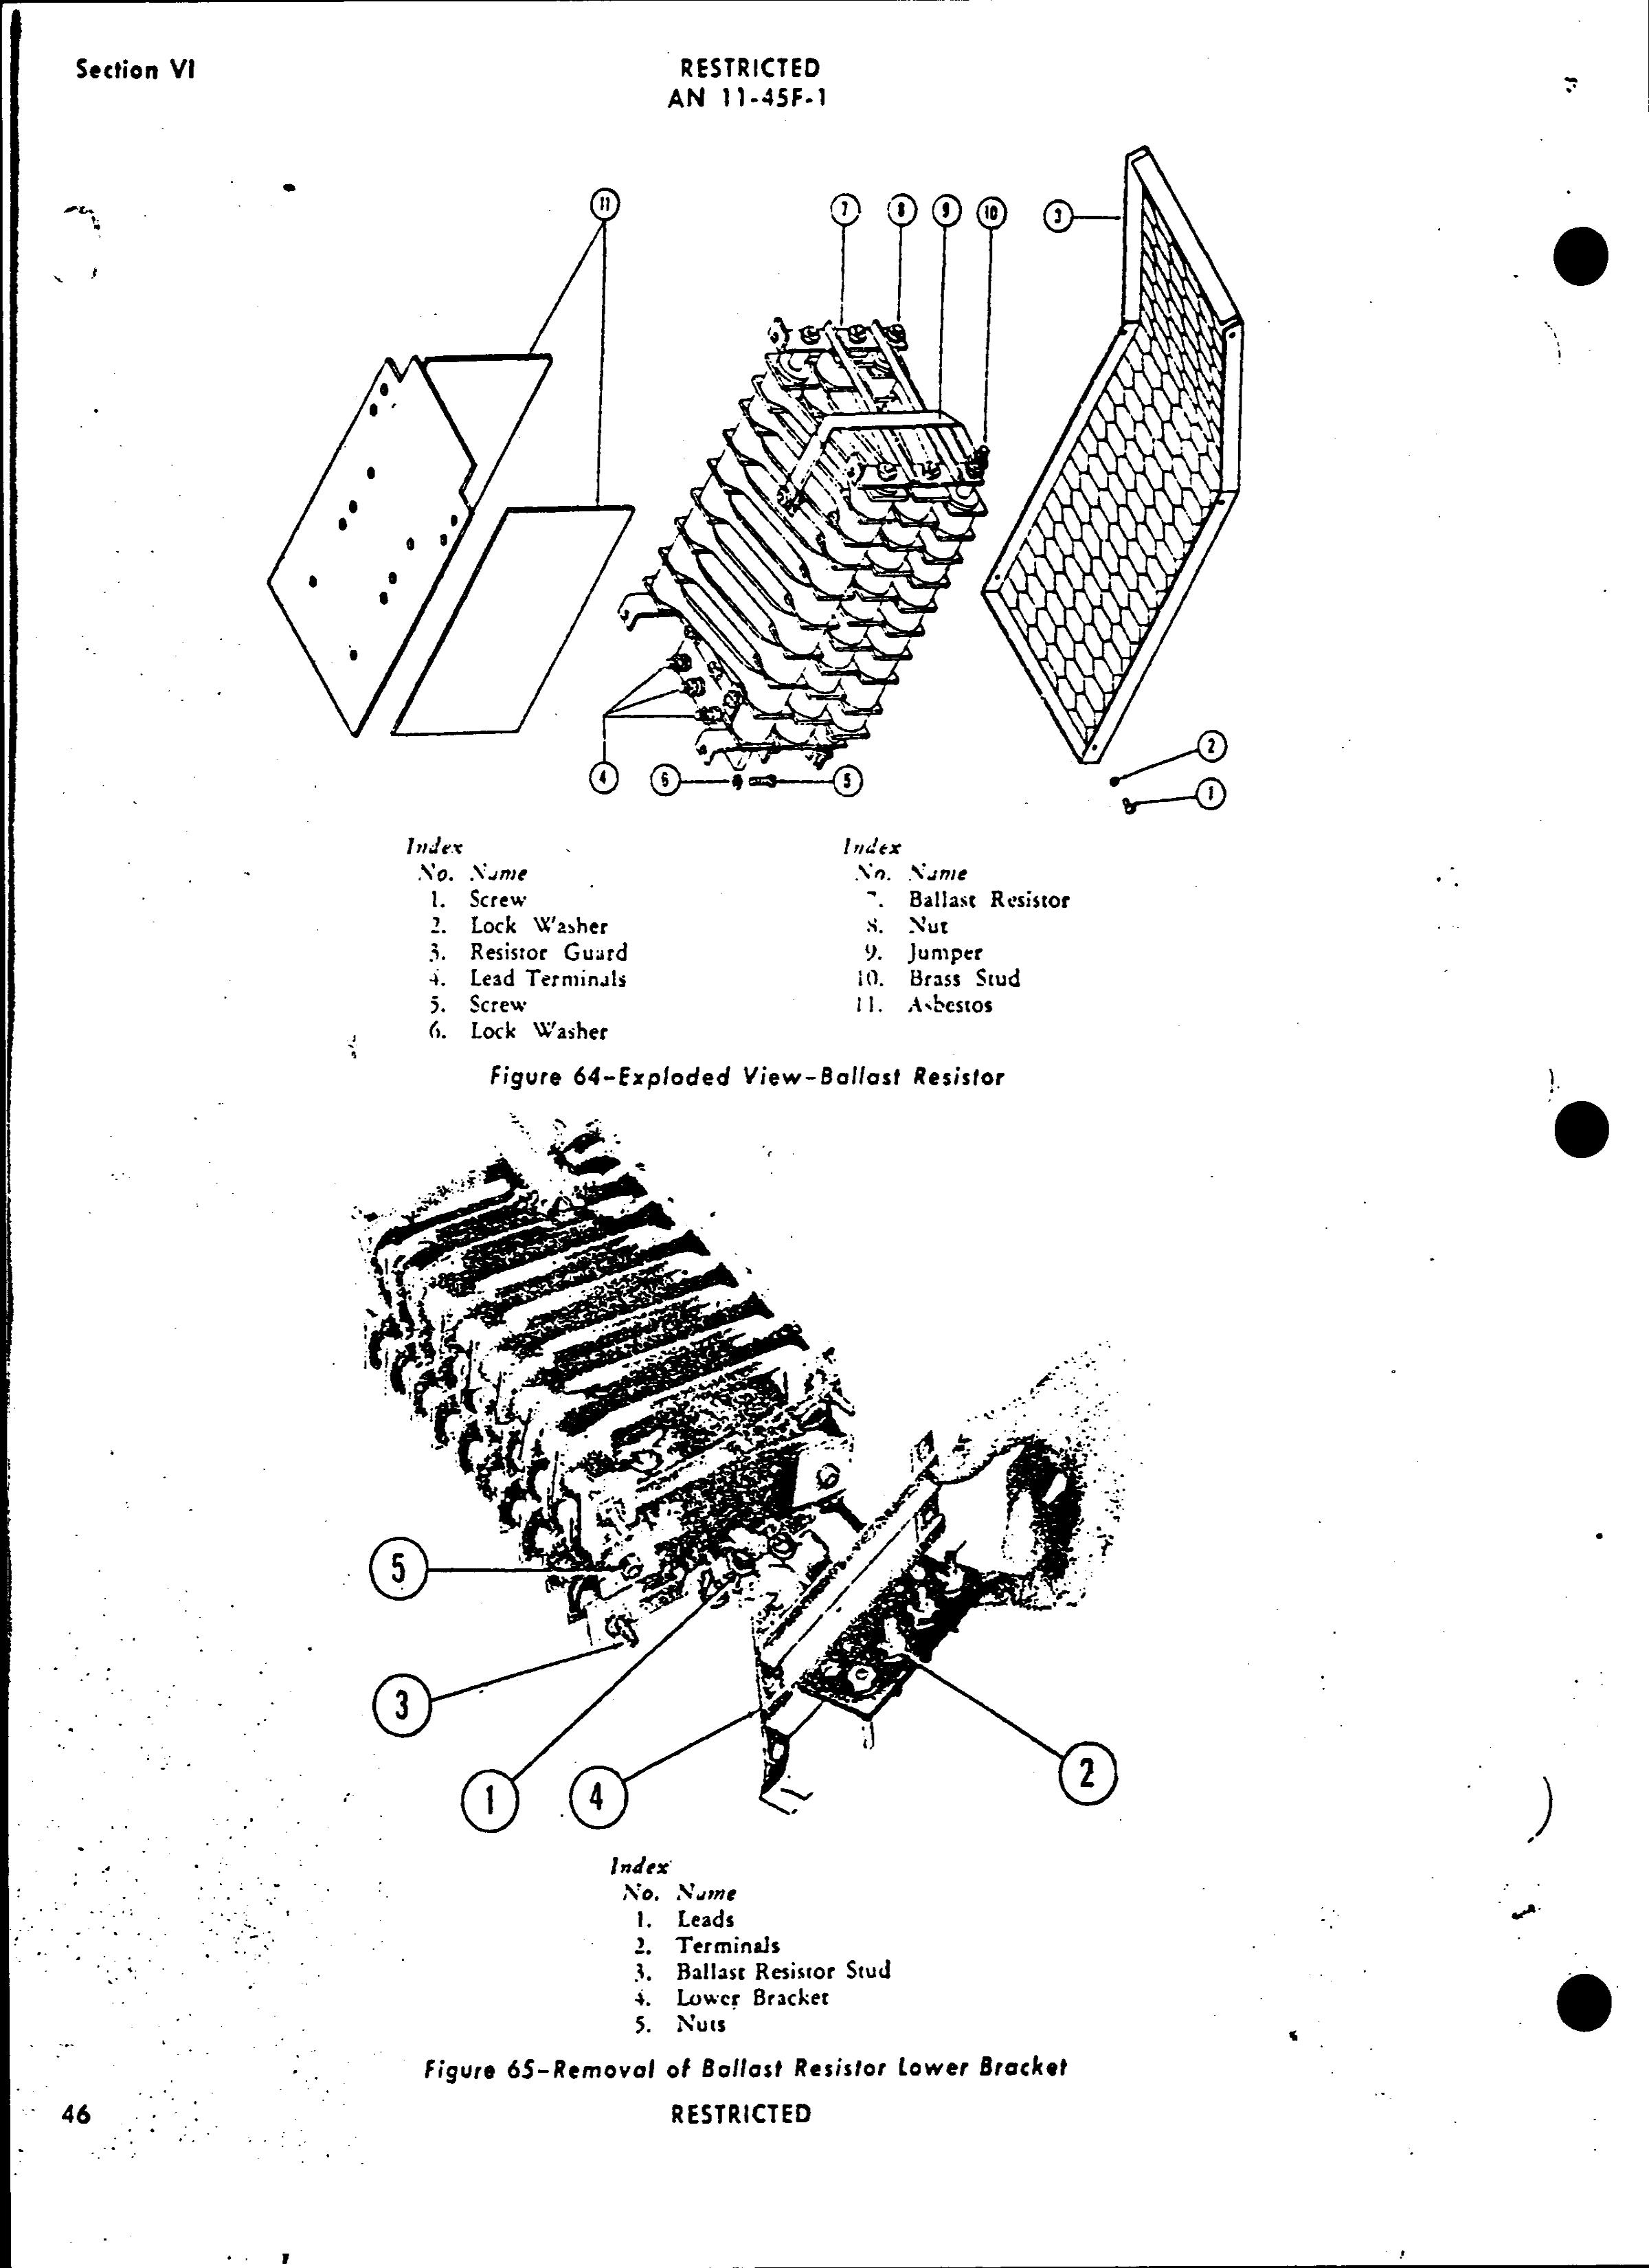 Sample page 50 from AirCorps Library document: Turret - AT-11